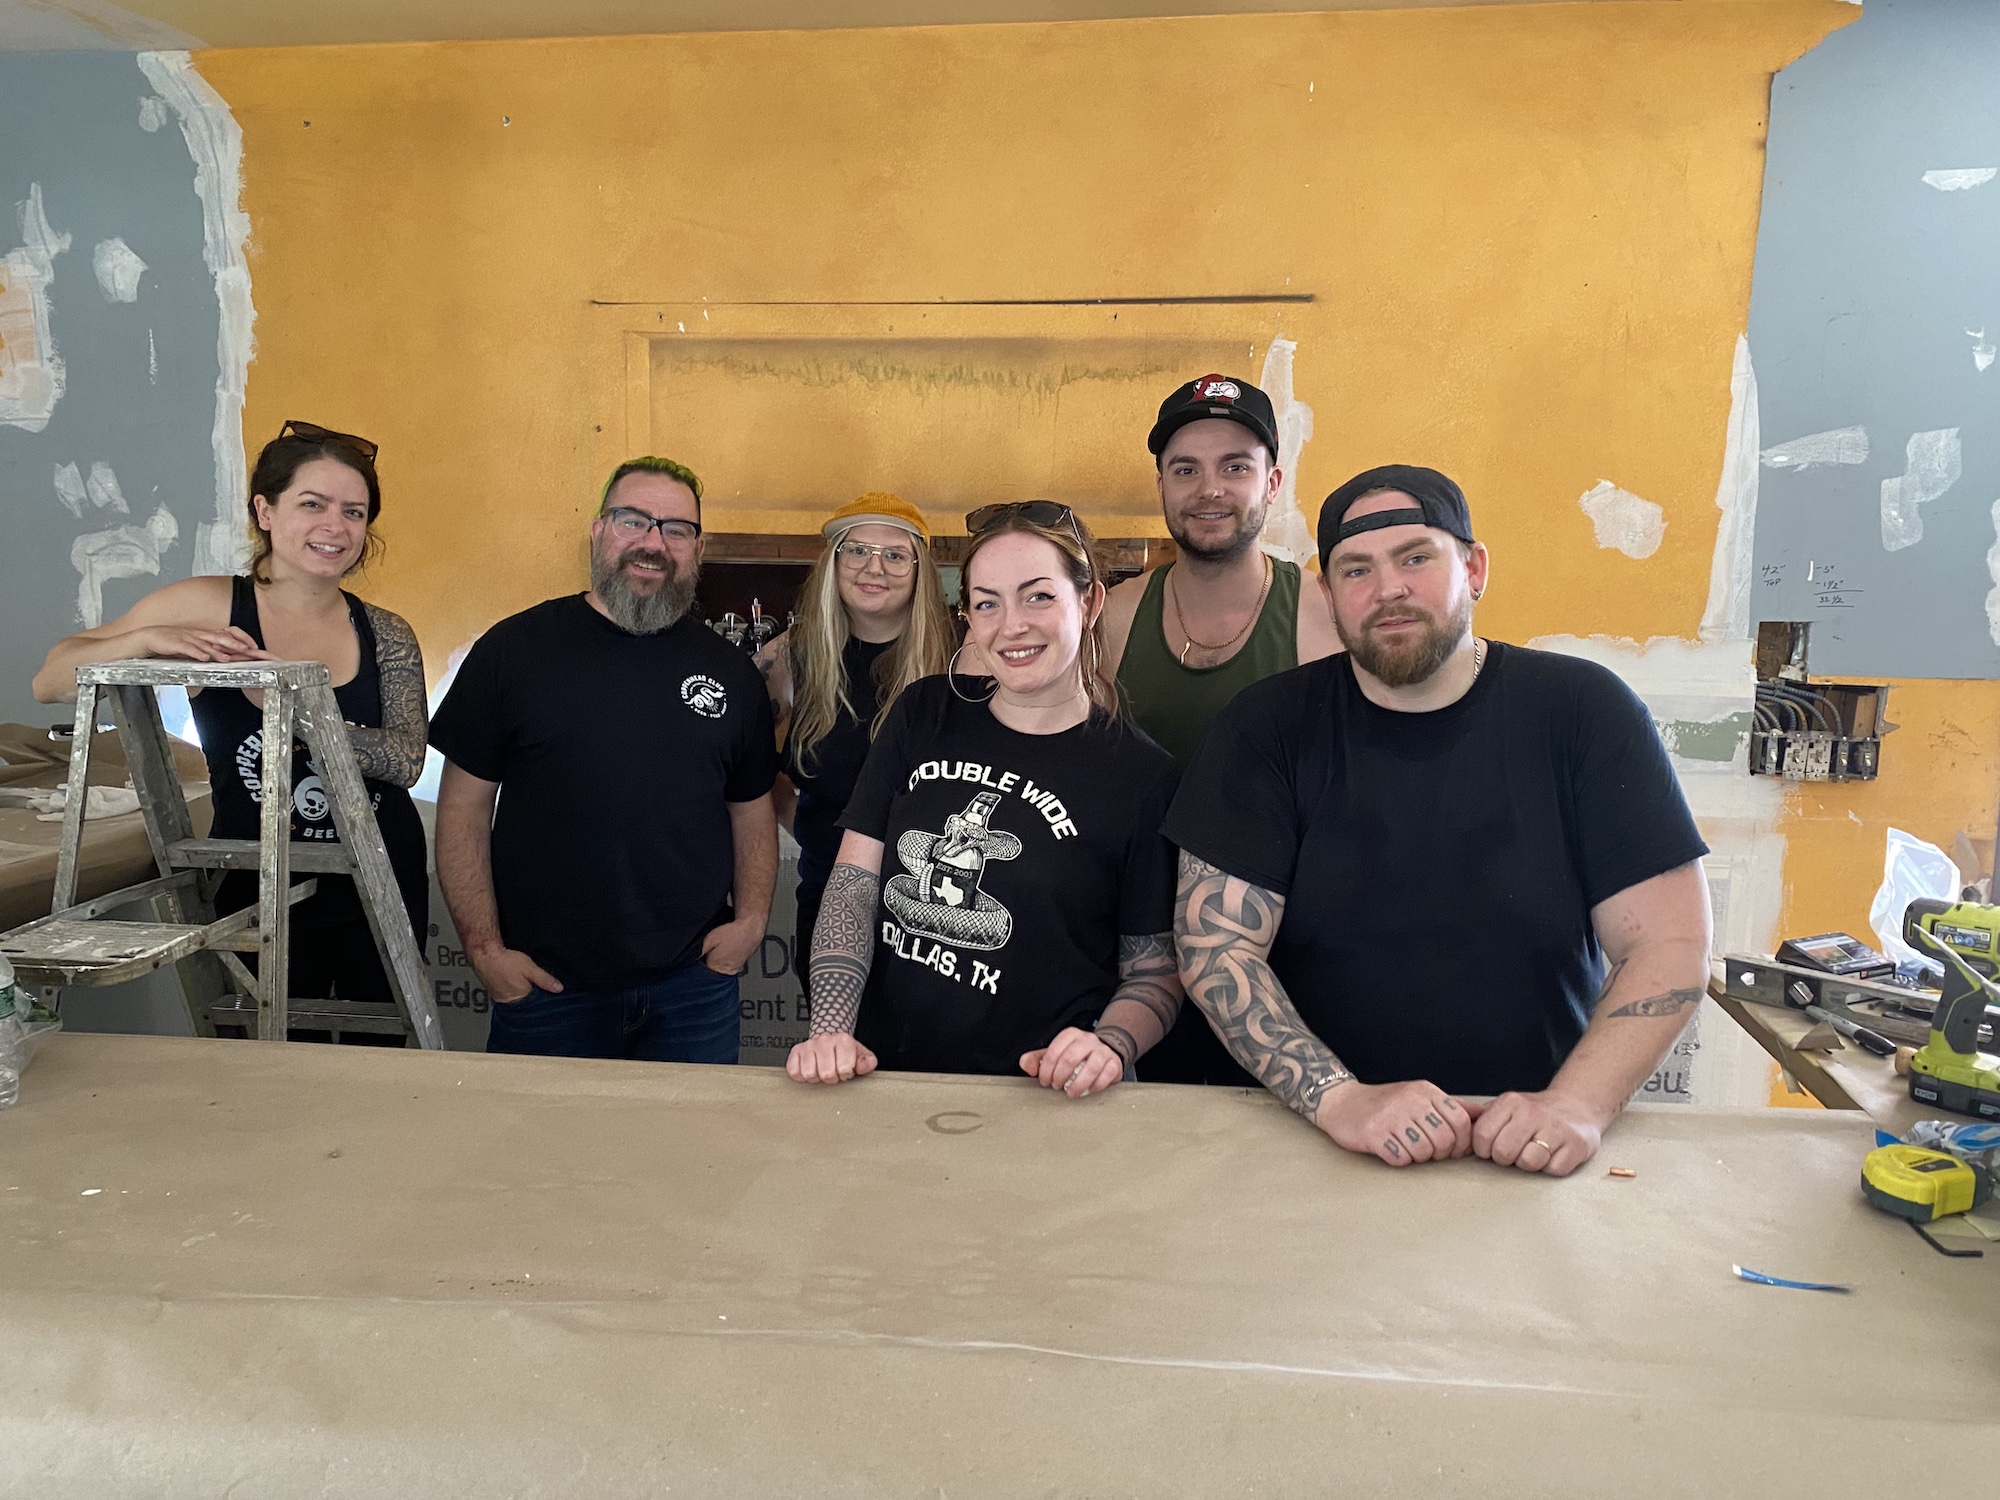 Local friends join forces to form Copperhead Club – Peekskill Herald